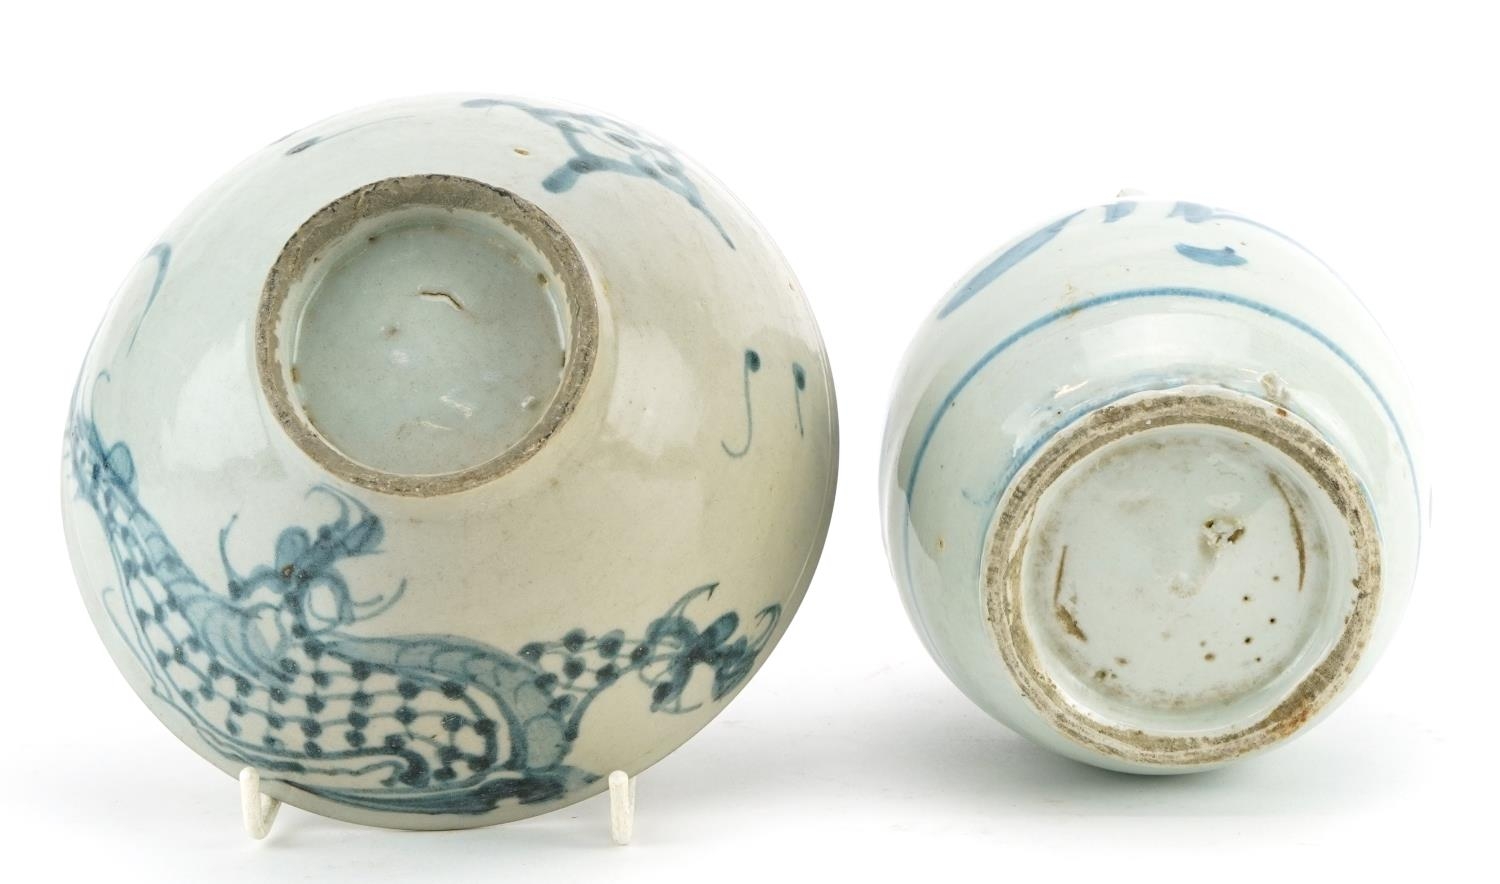 Chinese provincial blue and white porcelain spouted vessel and a similar bowl hand painted with a - Image 3 of 3